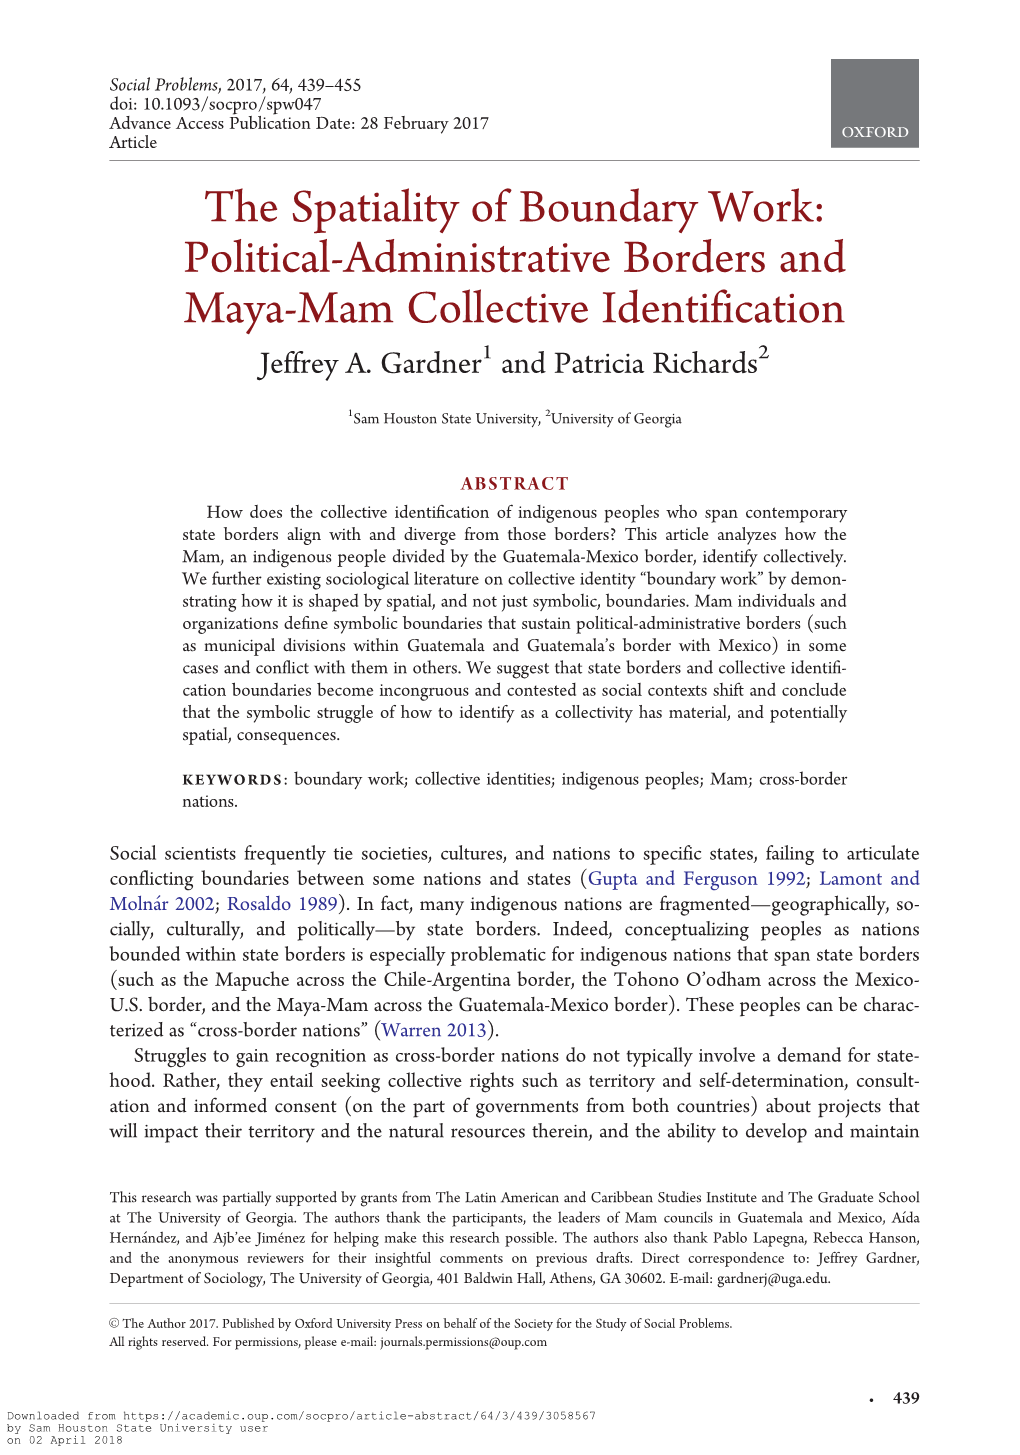 The Spatiality of Boundary Work: Political-Administrative Borders and Maya-Mam Collective Identification Jeffrey A